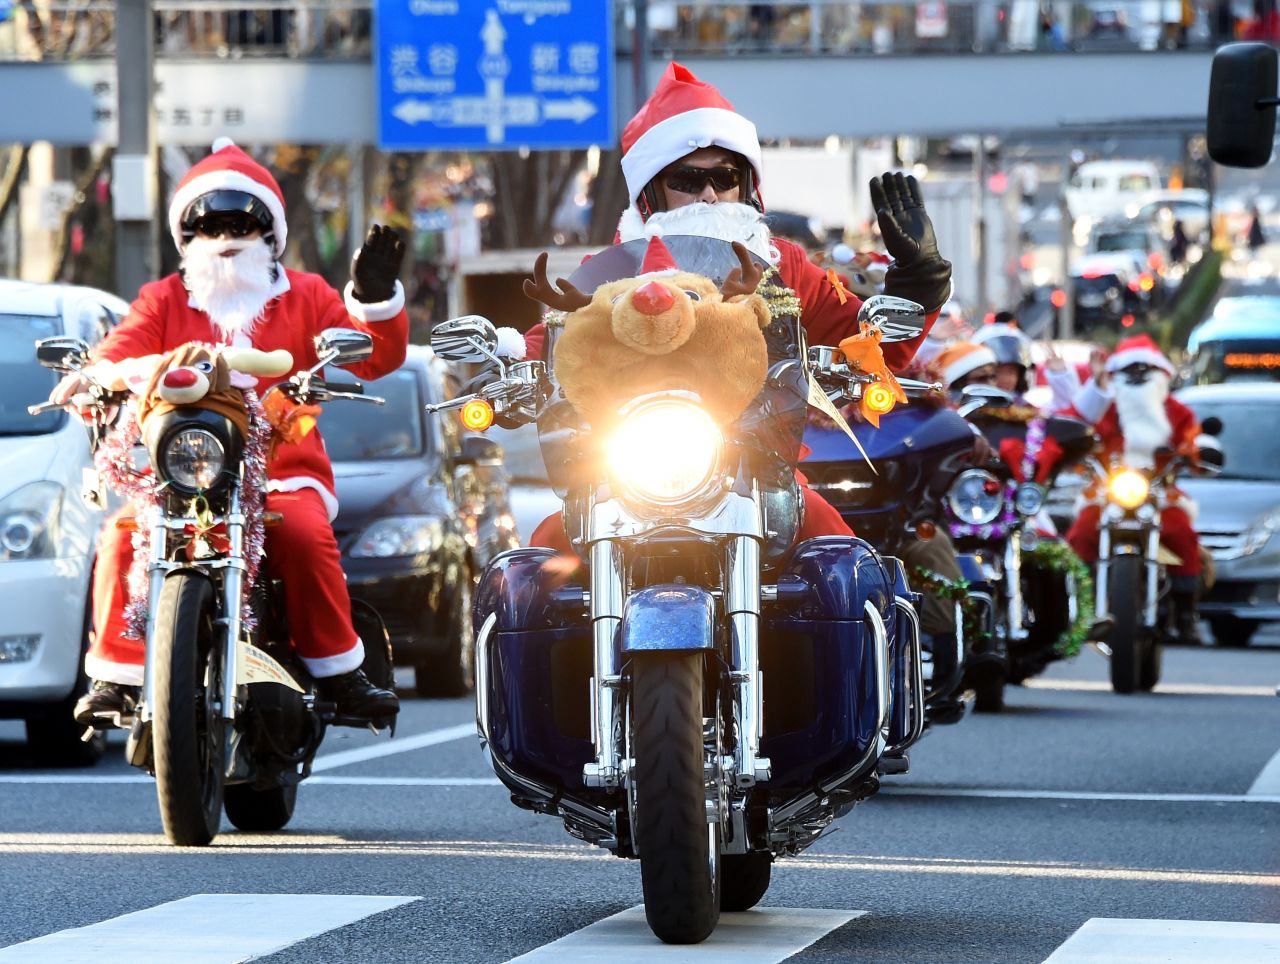 Motorcyclists in Santa and reindeer outfits ride through the streets of Tokyo.